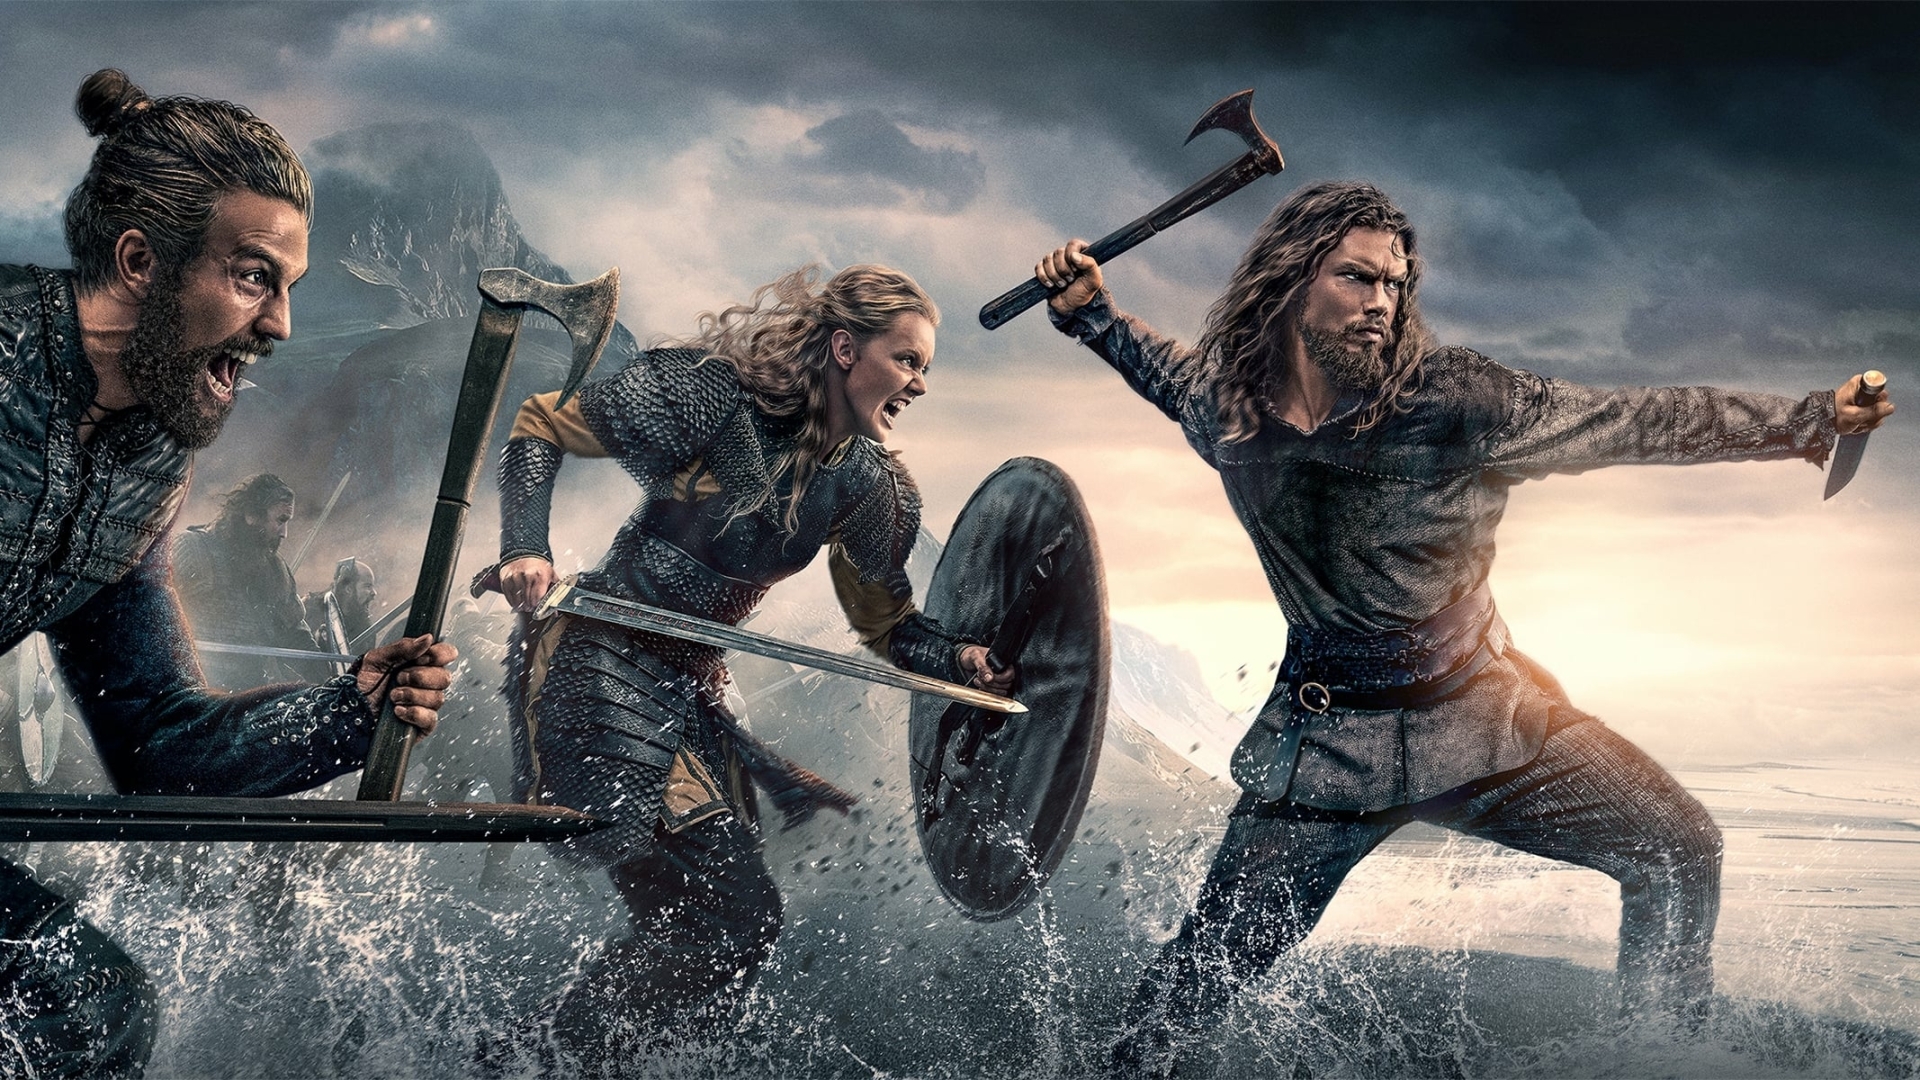 Vikings Wallpapers, HD Vikings Backgrounds, Free Images Download